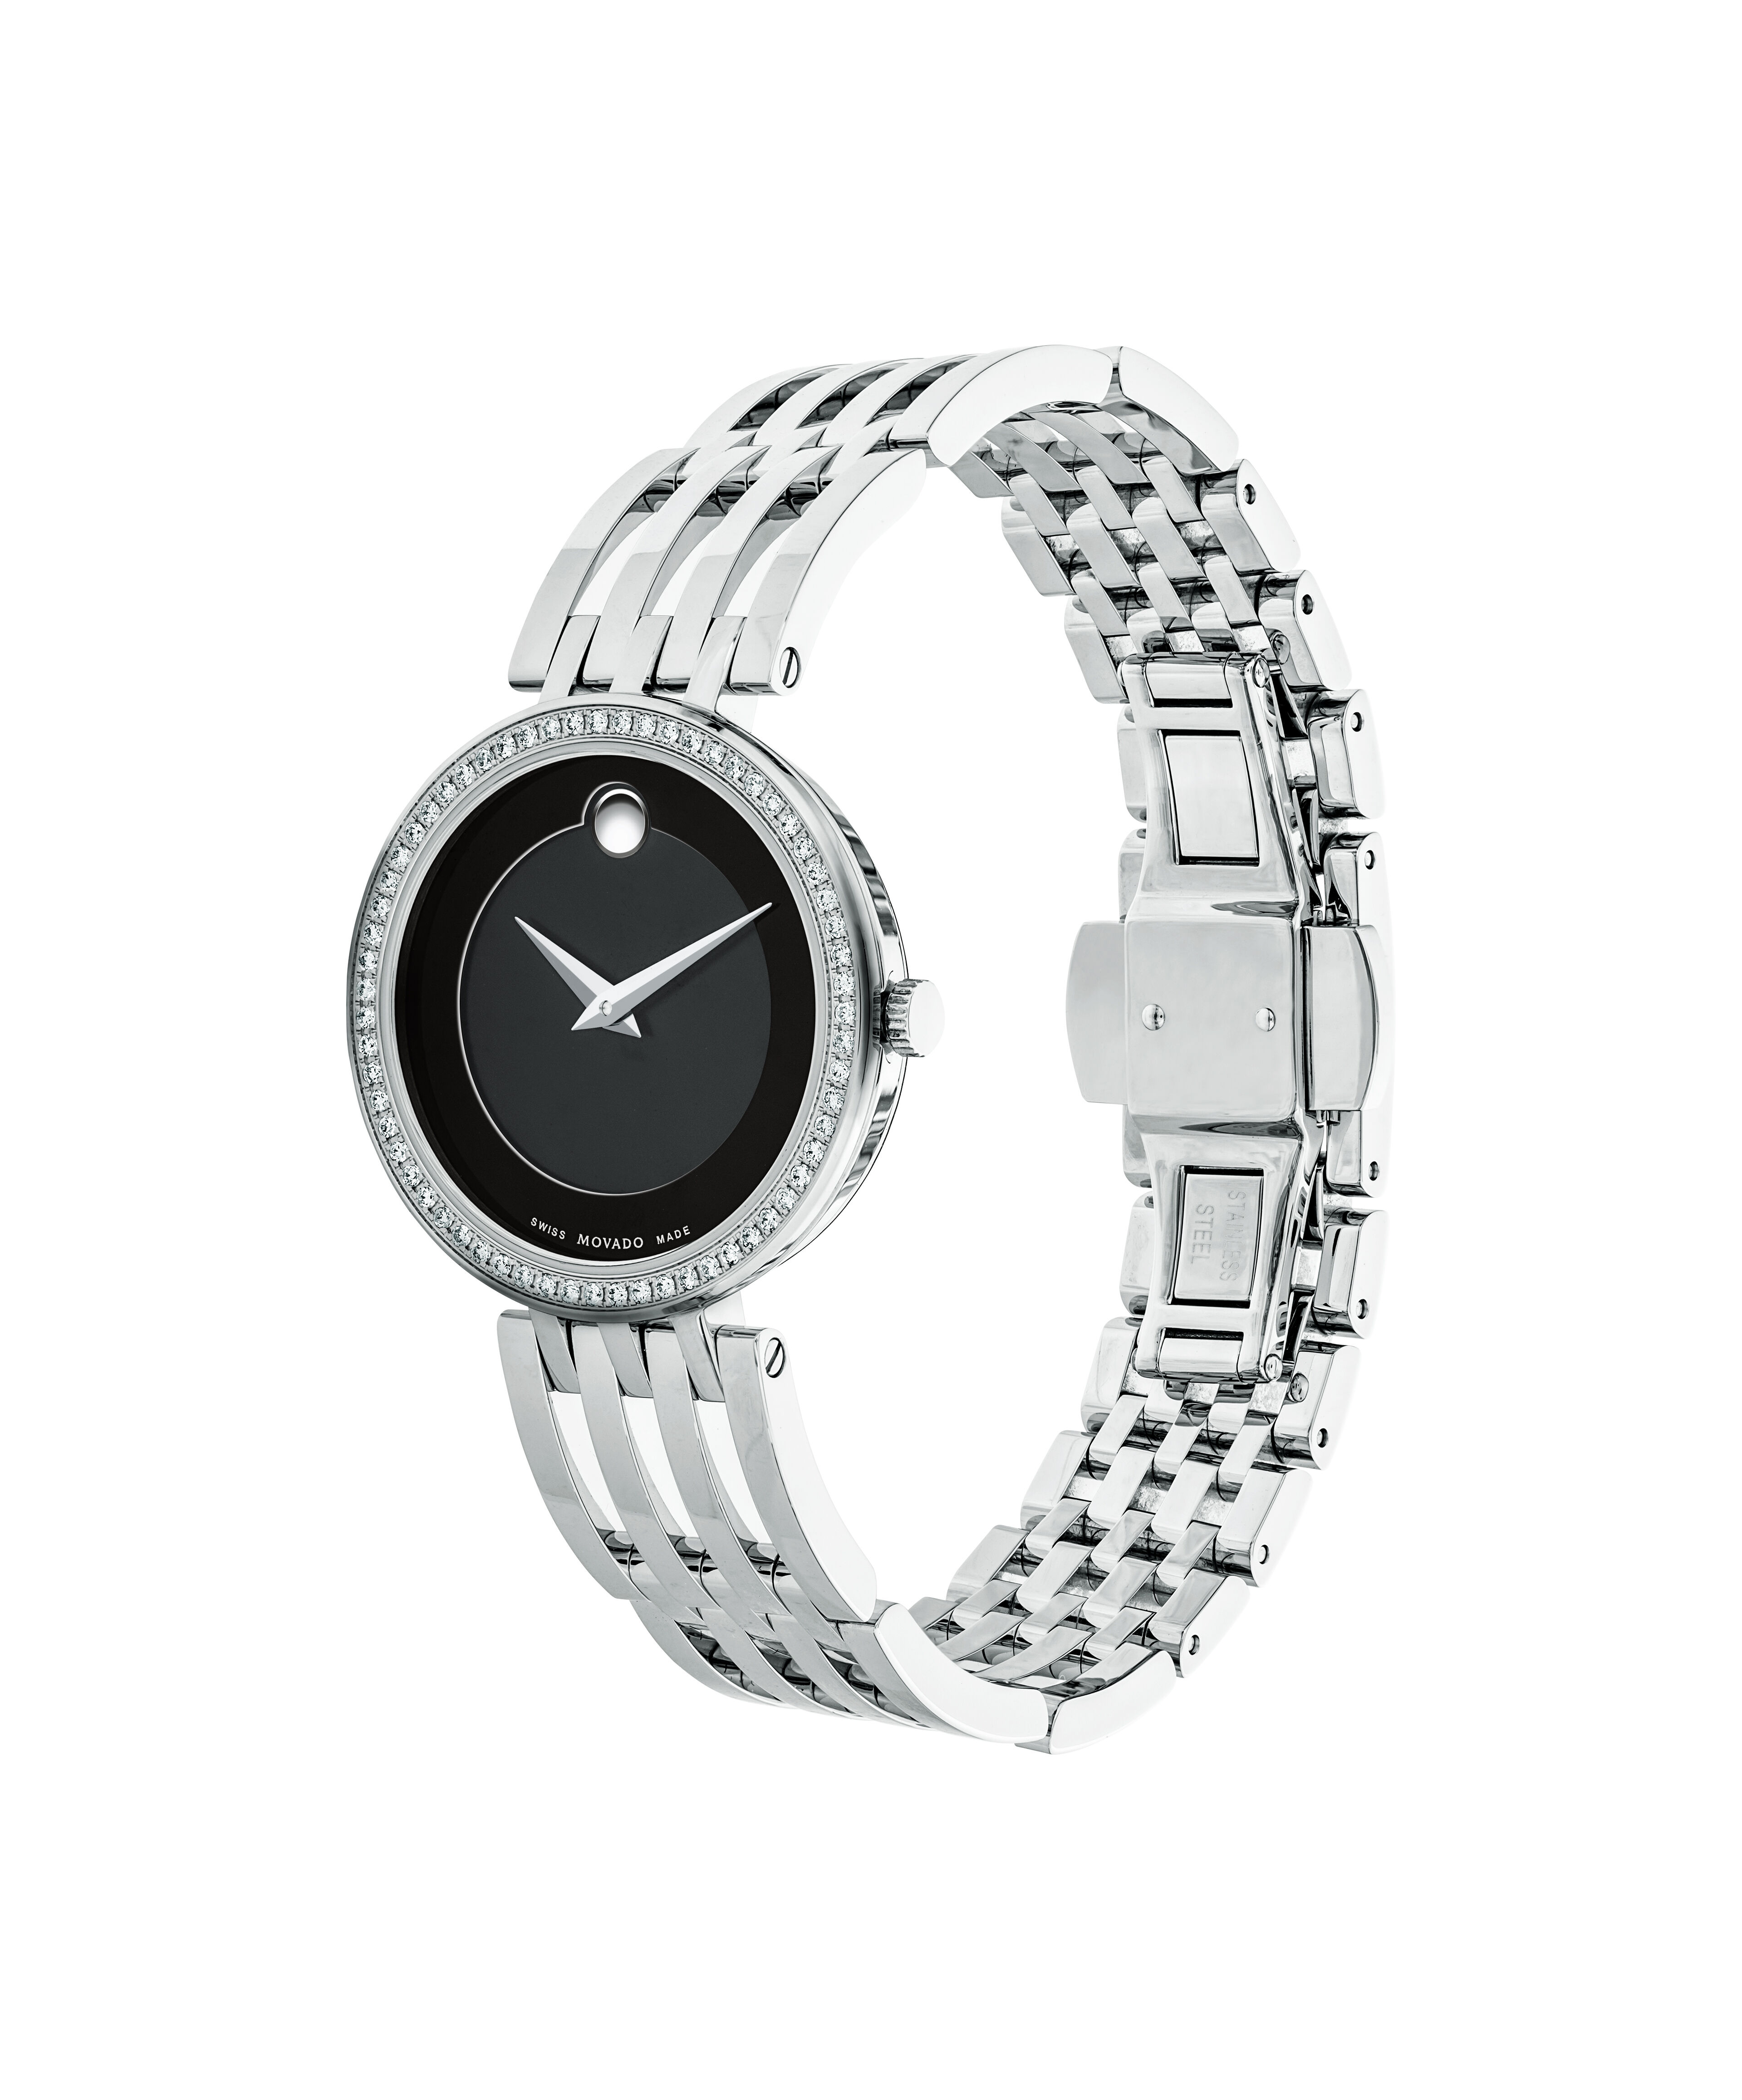 Movado Vizio 84.C5.898 Unisex Watch in Stainless Steel